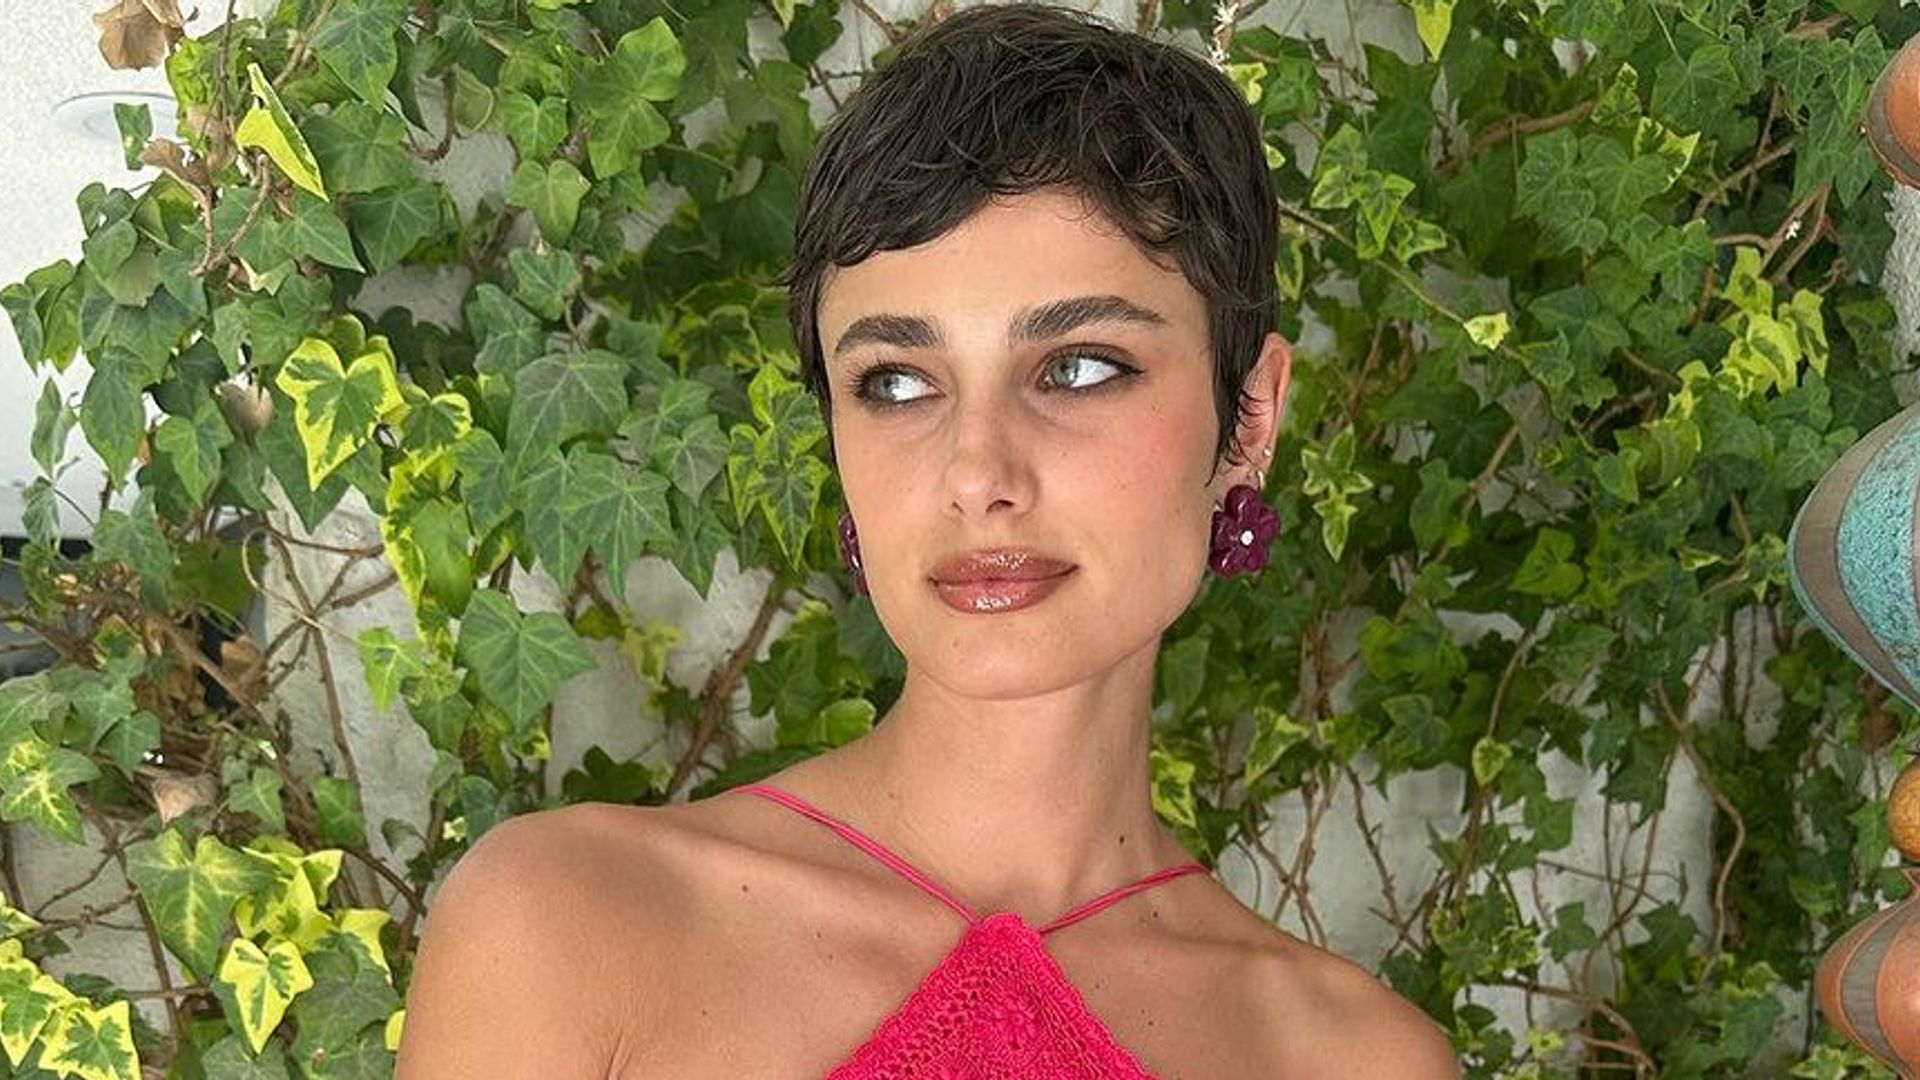 The Whisper Pixie is this spring's must-have haircut for 90s supermodel cool